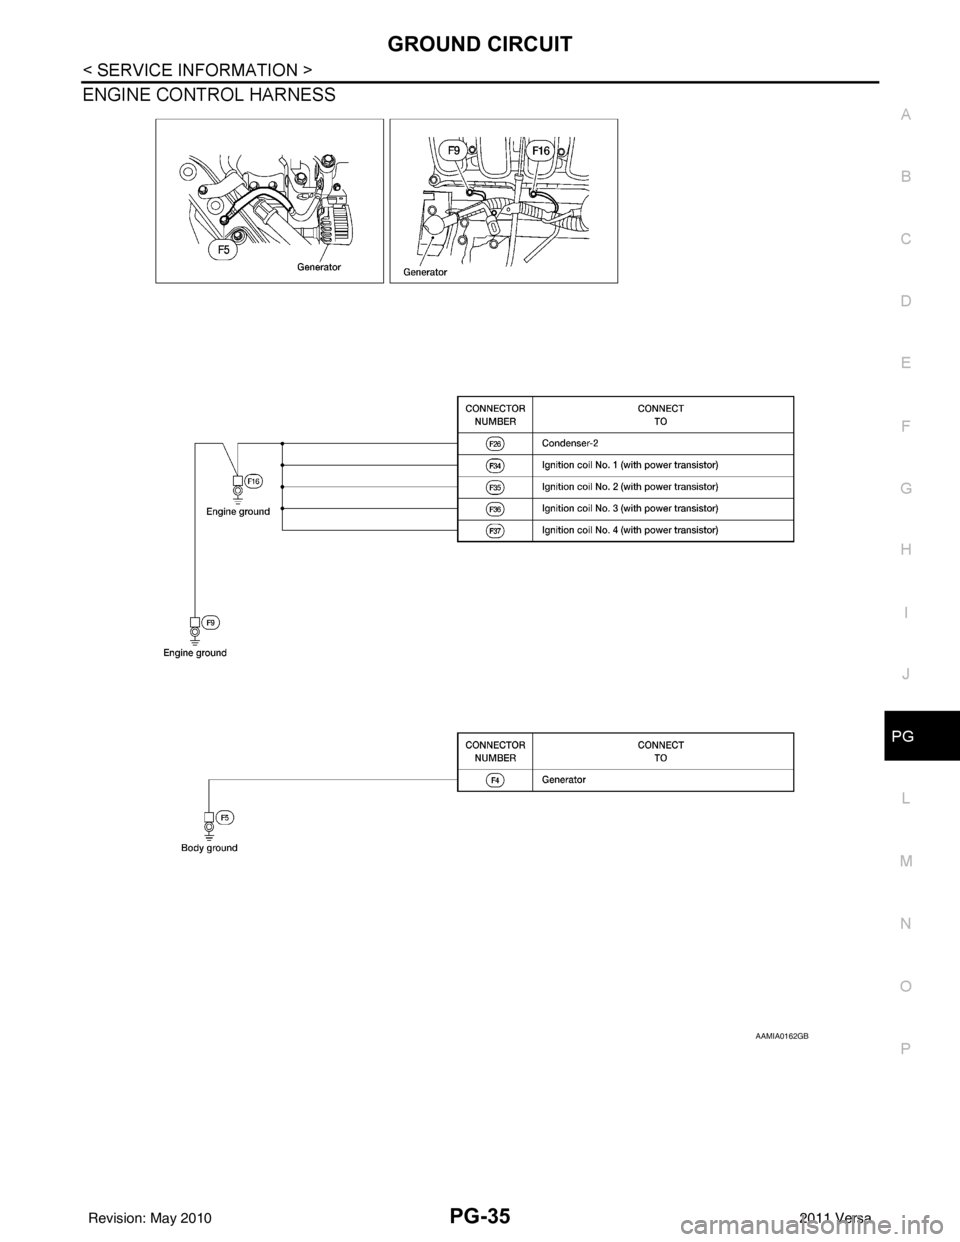 NISSAN LATIO 2011  Service Repair Manual GROUND CIRCUITPG-35
< SERVICE INFORMATION >
C
DE
F
G H
I
J
L
M A
B
PG
N
O P
ENGINE CONTROL HARNESS
AAMIA0162GB
Revision: May 2010 2011 Versa 